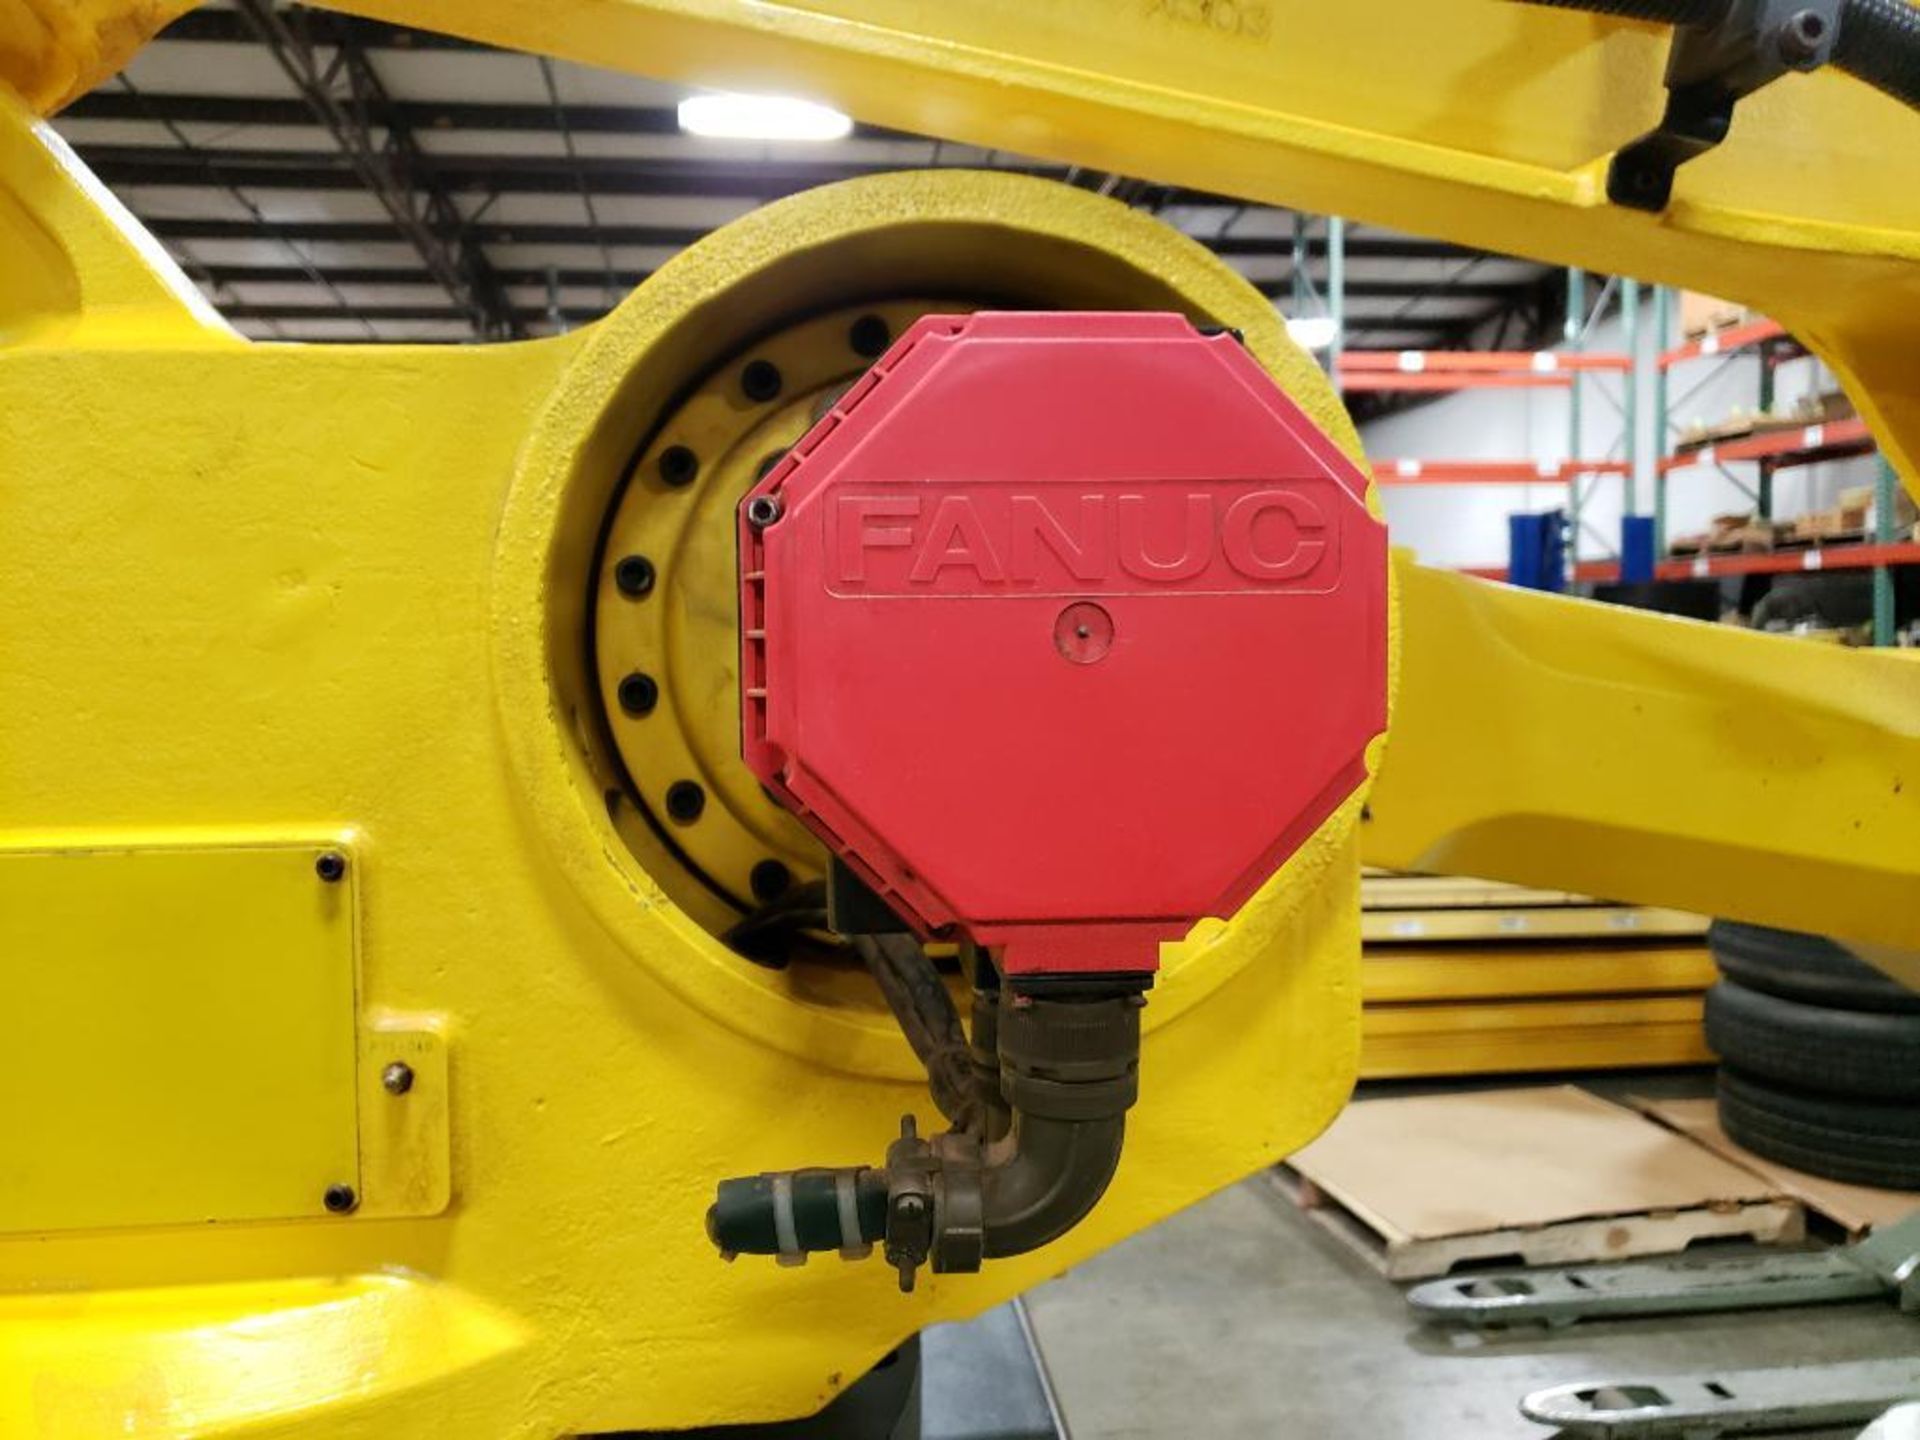 Fanuc M-410i HW robot arm. Does not include controller or cables. (cables have been cut) - Image 6 of 27